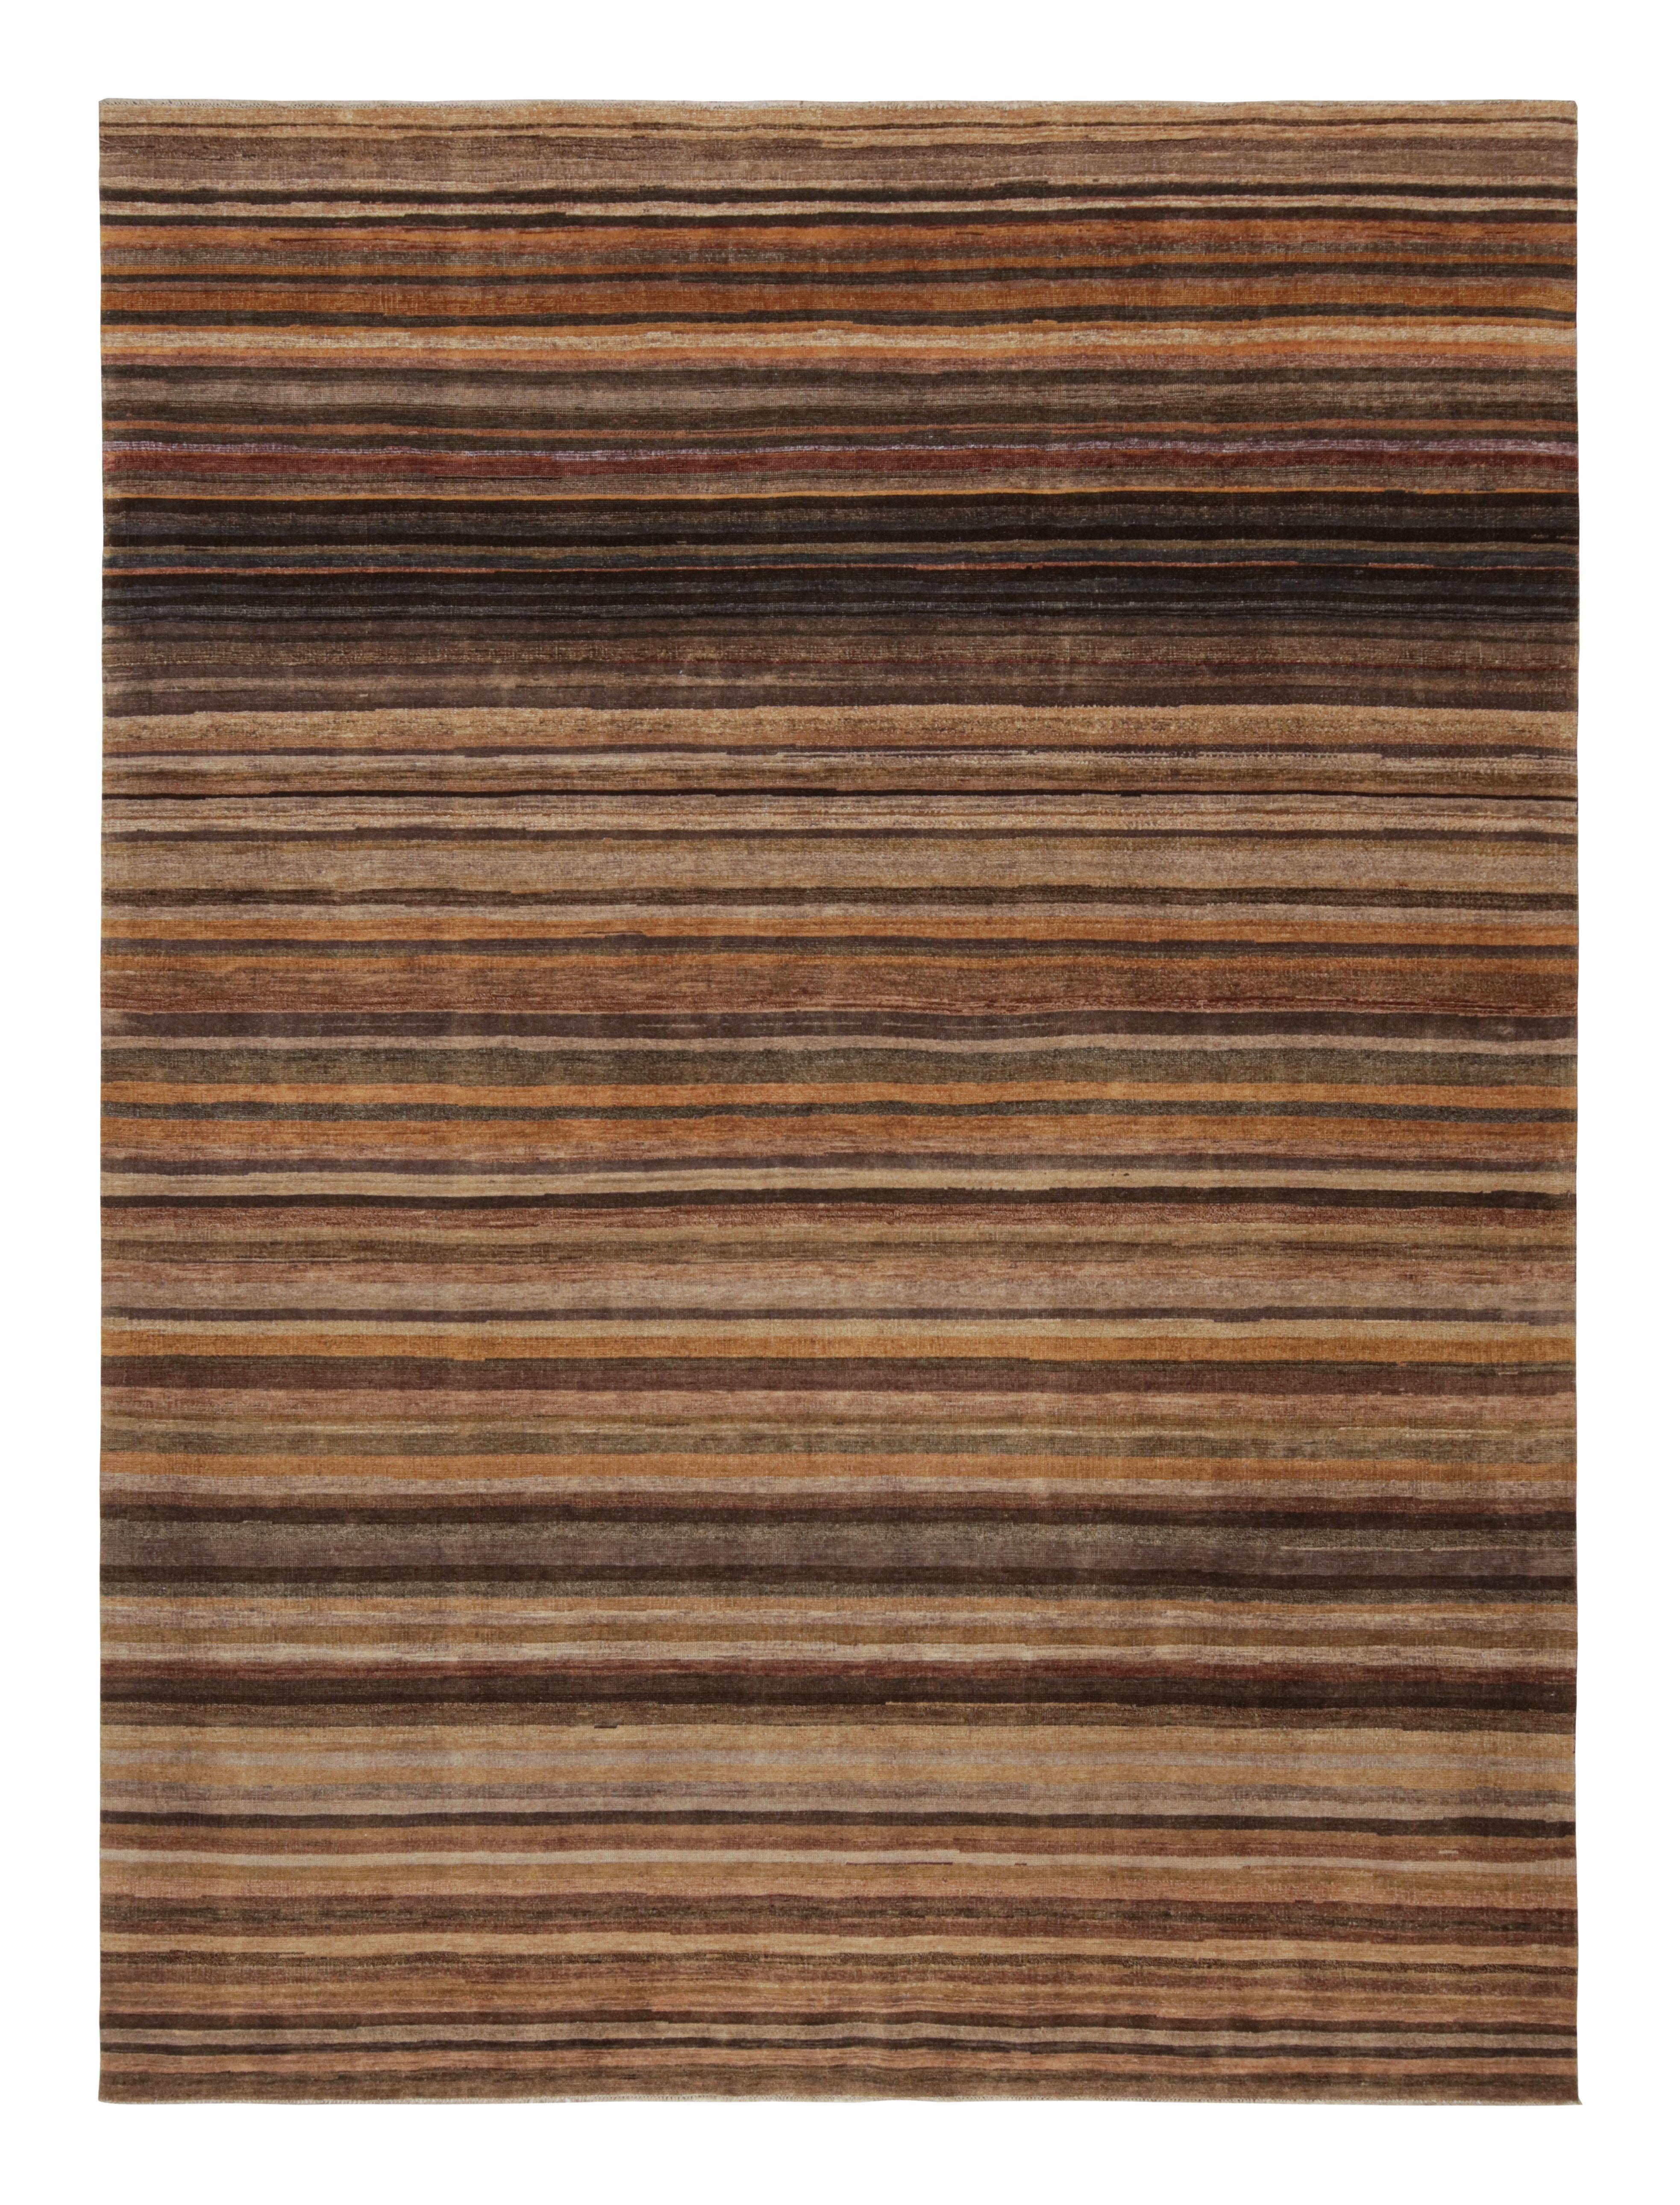 Rug & Kilim’s Textural Rug in Beige-Brown Stripes and Striae In New Condition For Sale In Long Island City, NY